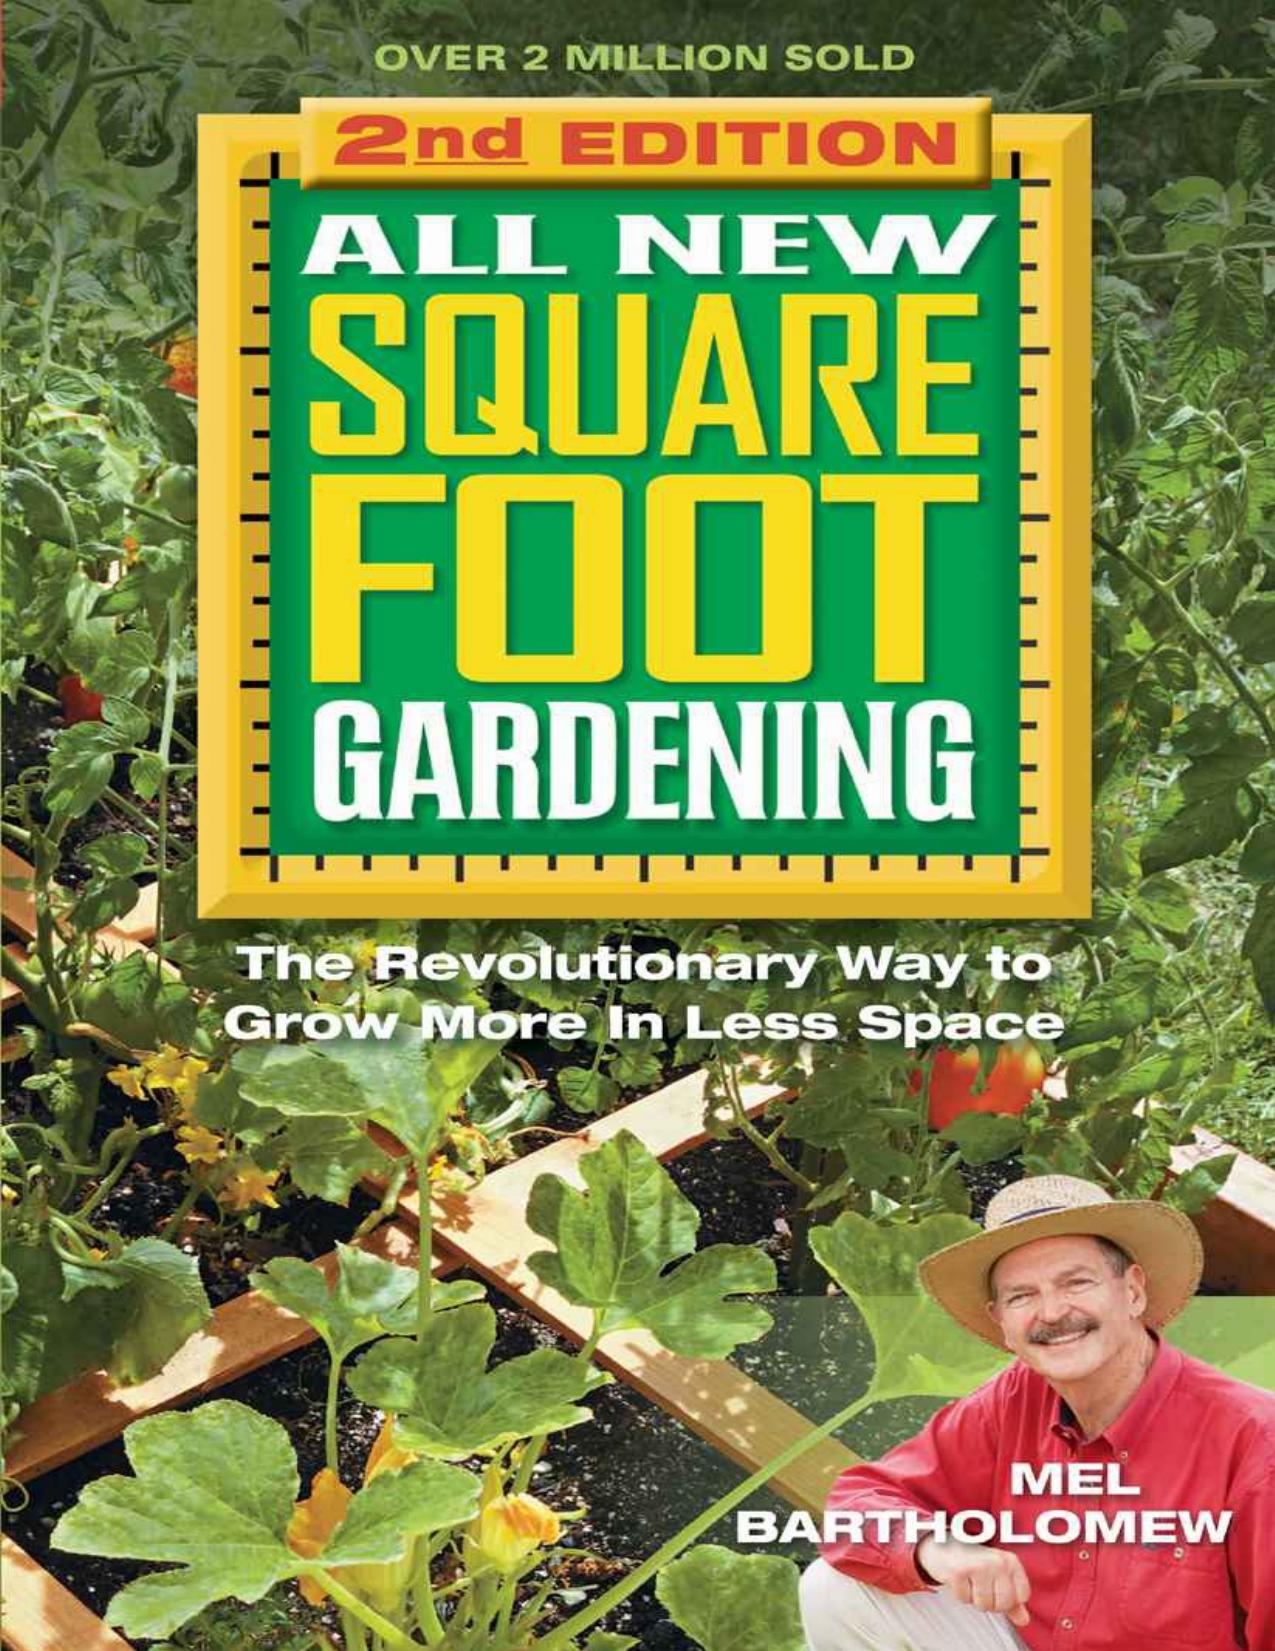 All New Square Foot Gardening, Second Edition: The Revolutionary Way to Grow More In Less Space by Bartholomew Mel